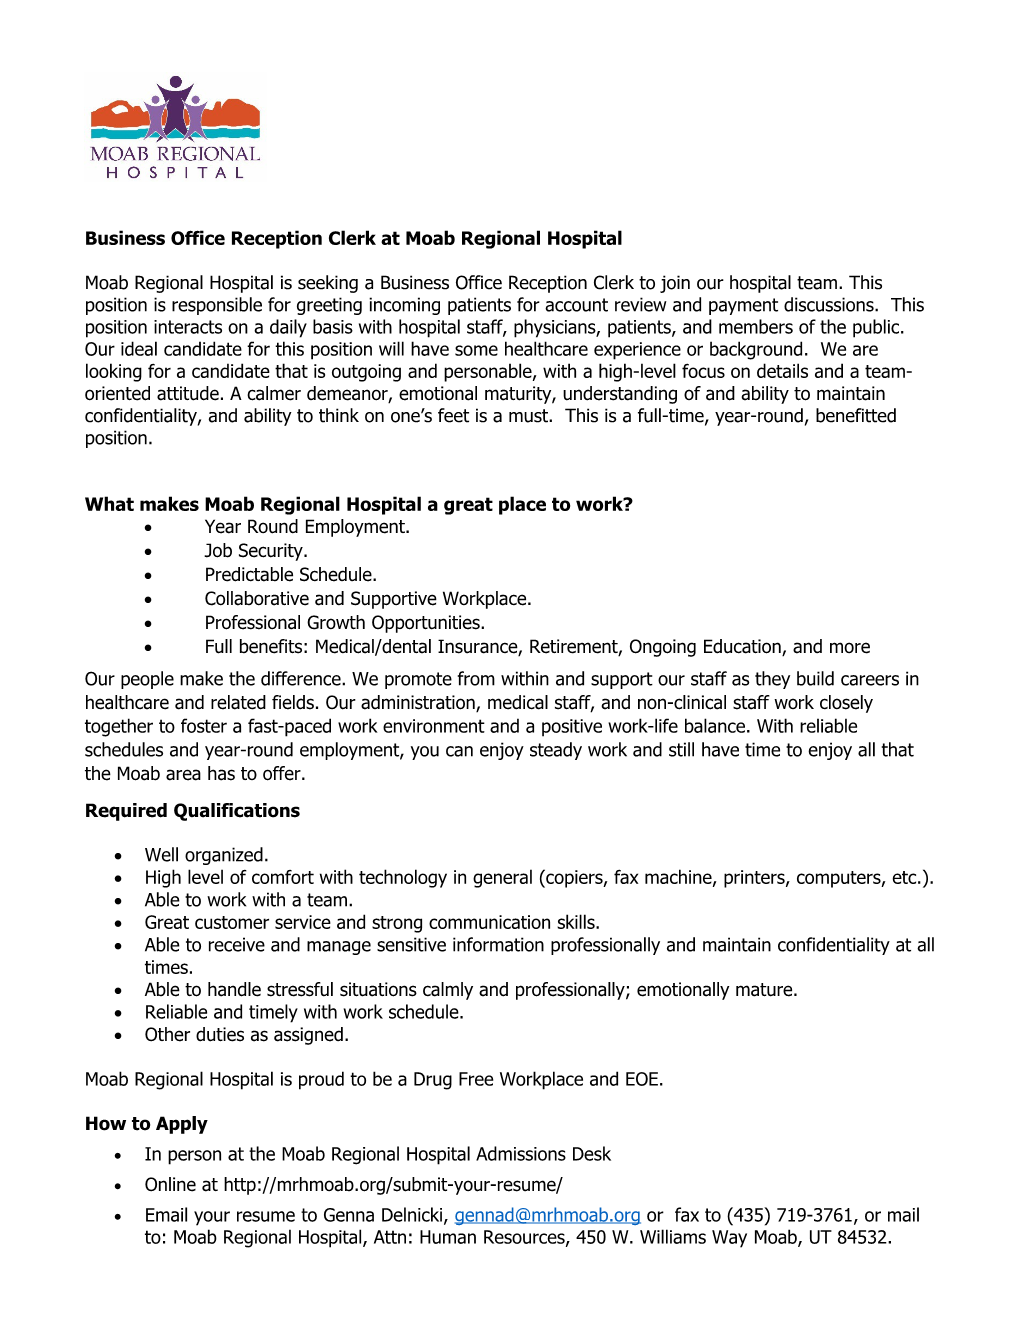 What Makes Moab Regional Hospital a Great Place to Work?